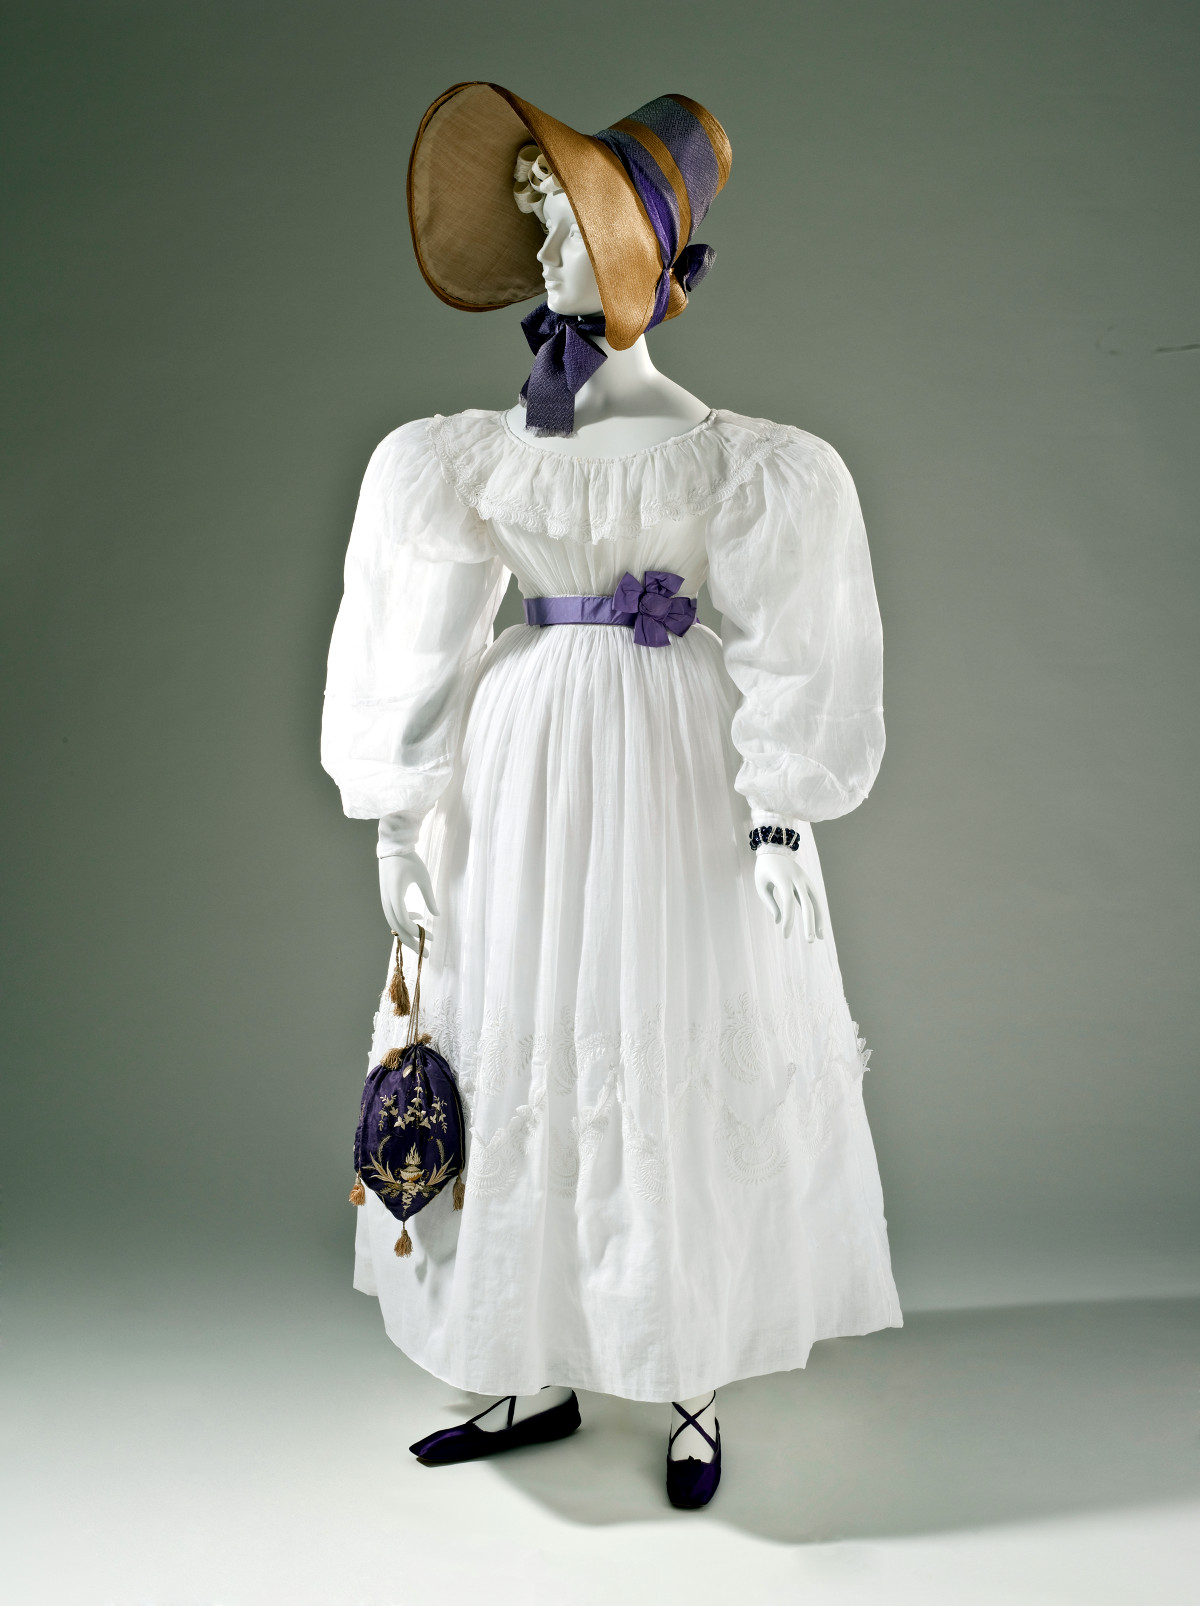 Lady from 1830 carry a French reticule handbag. LACMA